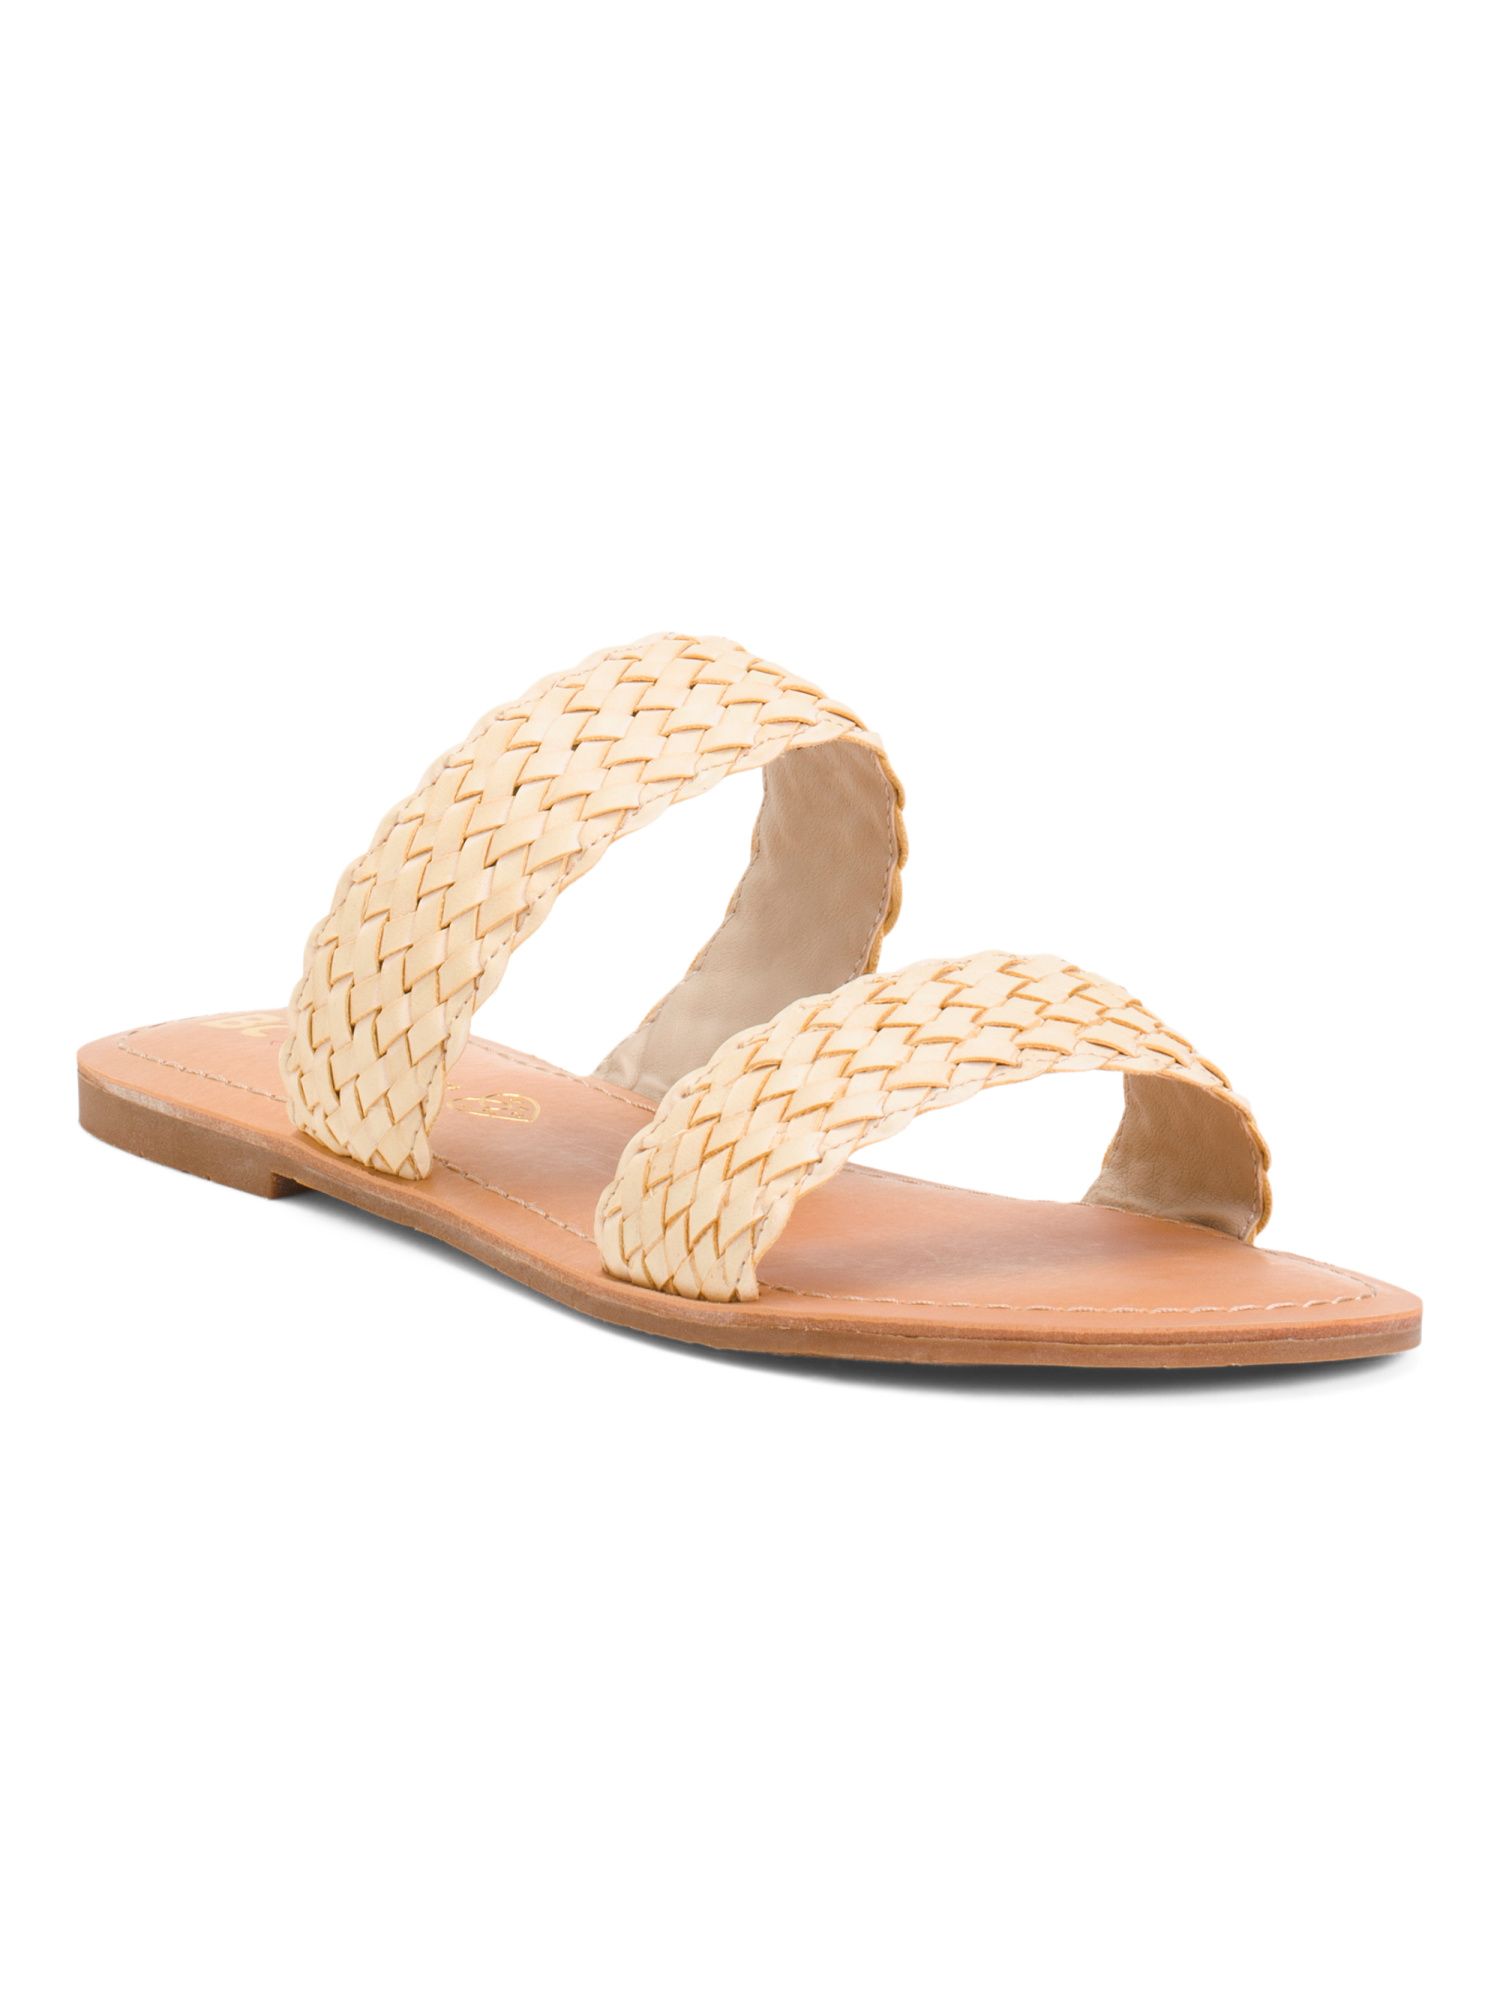 Double Banded Woven Sandals | TJ Maxx